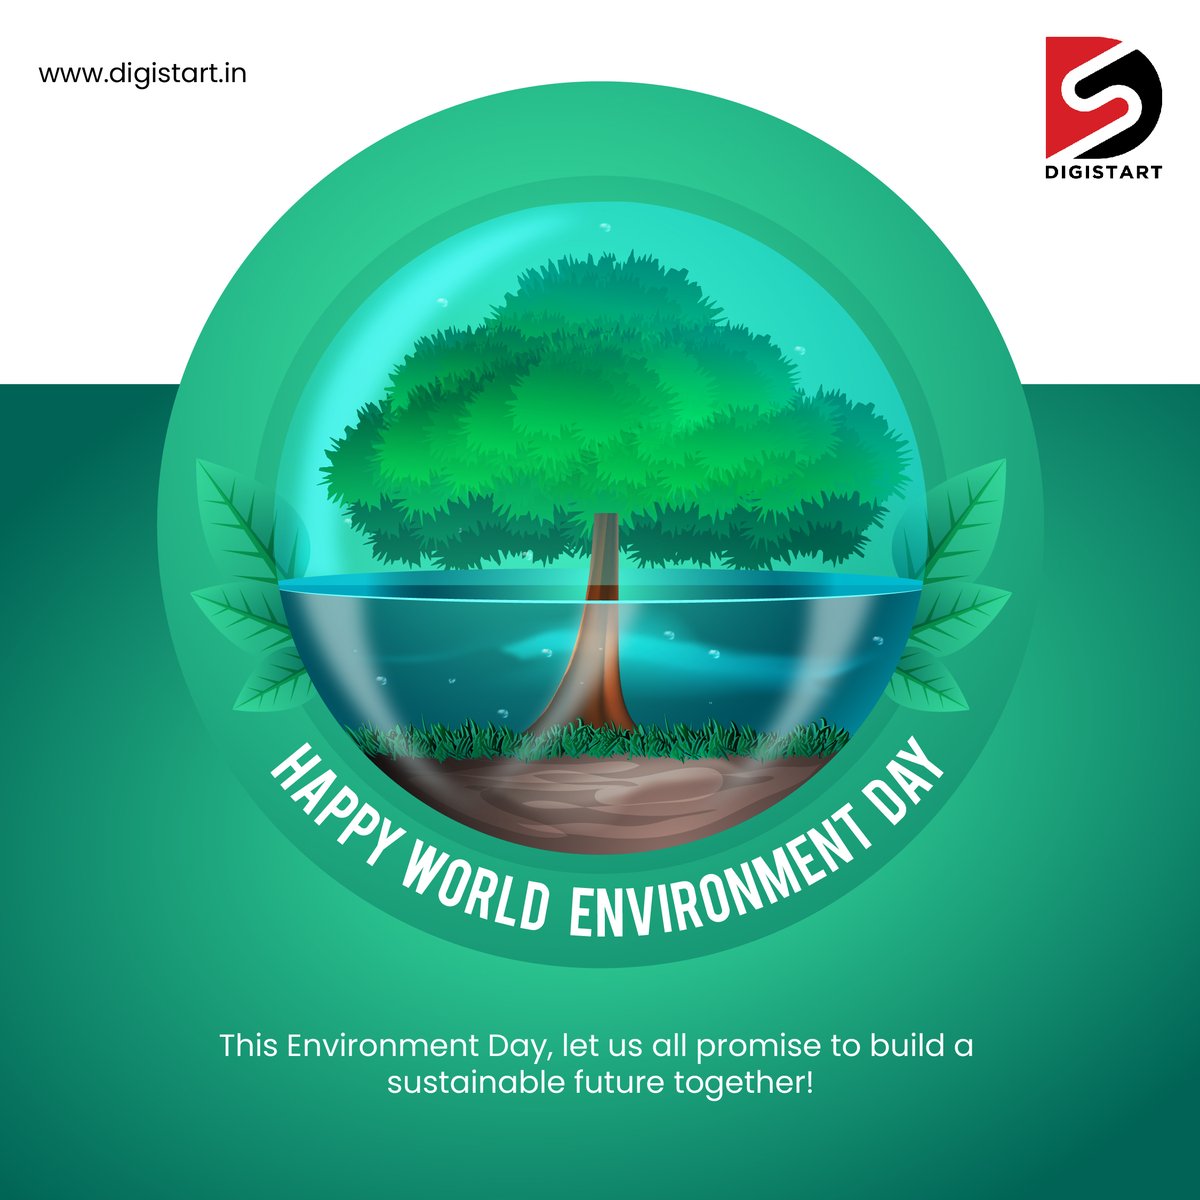 It is high time that we all engage in further sustainanble ventures for a better future!

This World Environment Day, promise yourself to be more generous towards Mother Nature!

#WorldEnvironmentDay #DigitalForGreen #SustainableSolutions #digitalmarketing #seo #socialmediads